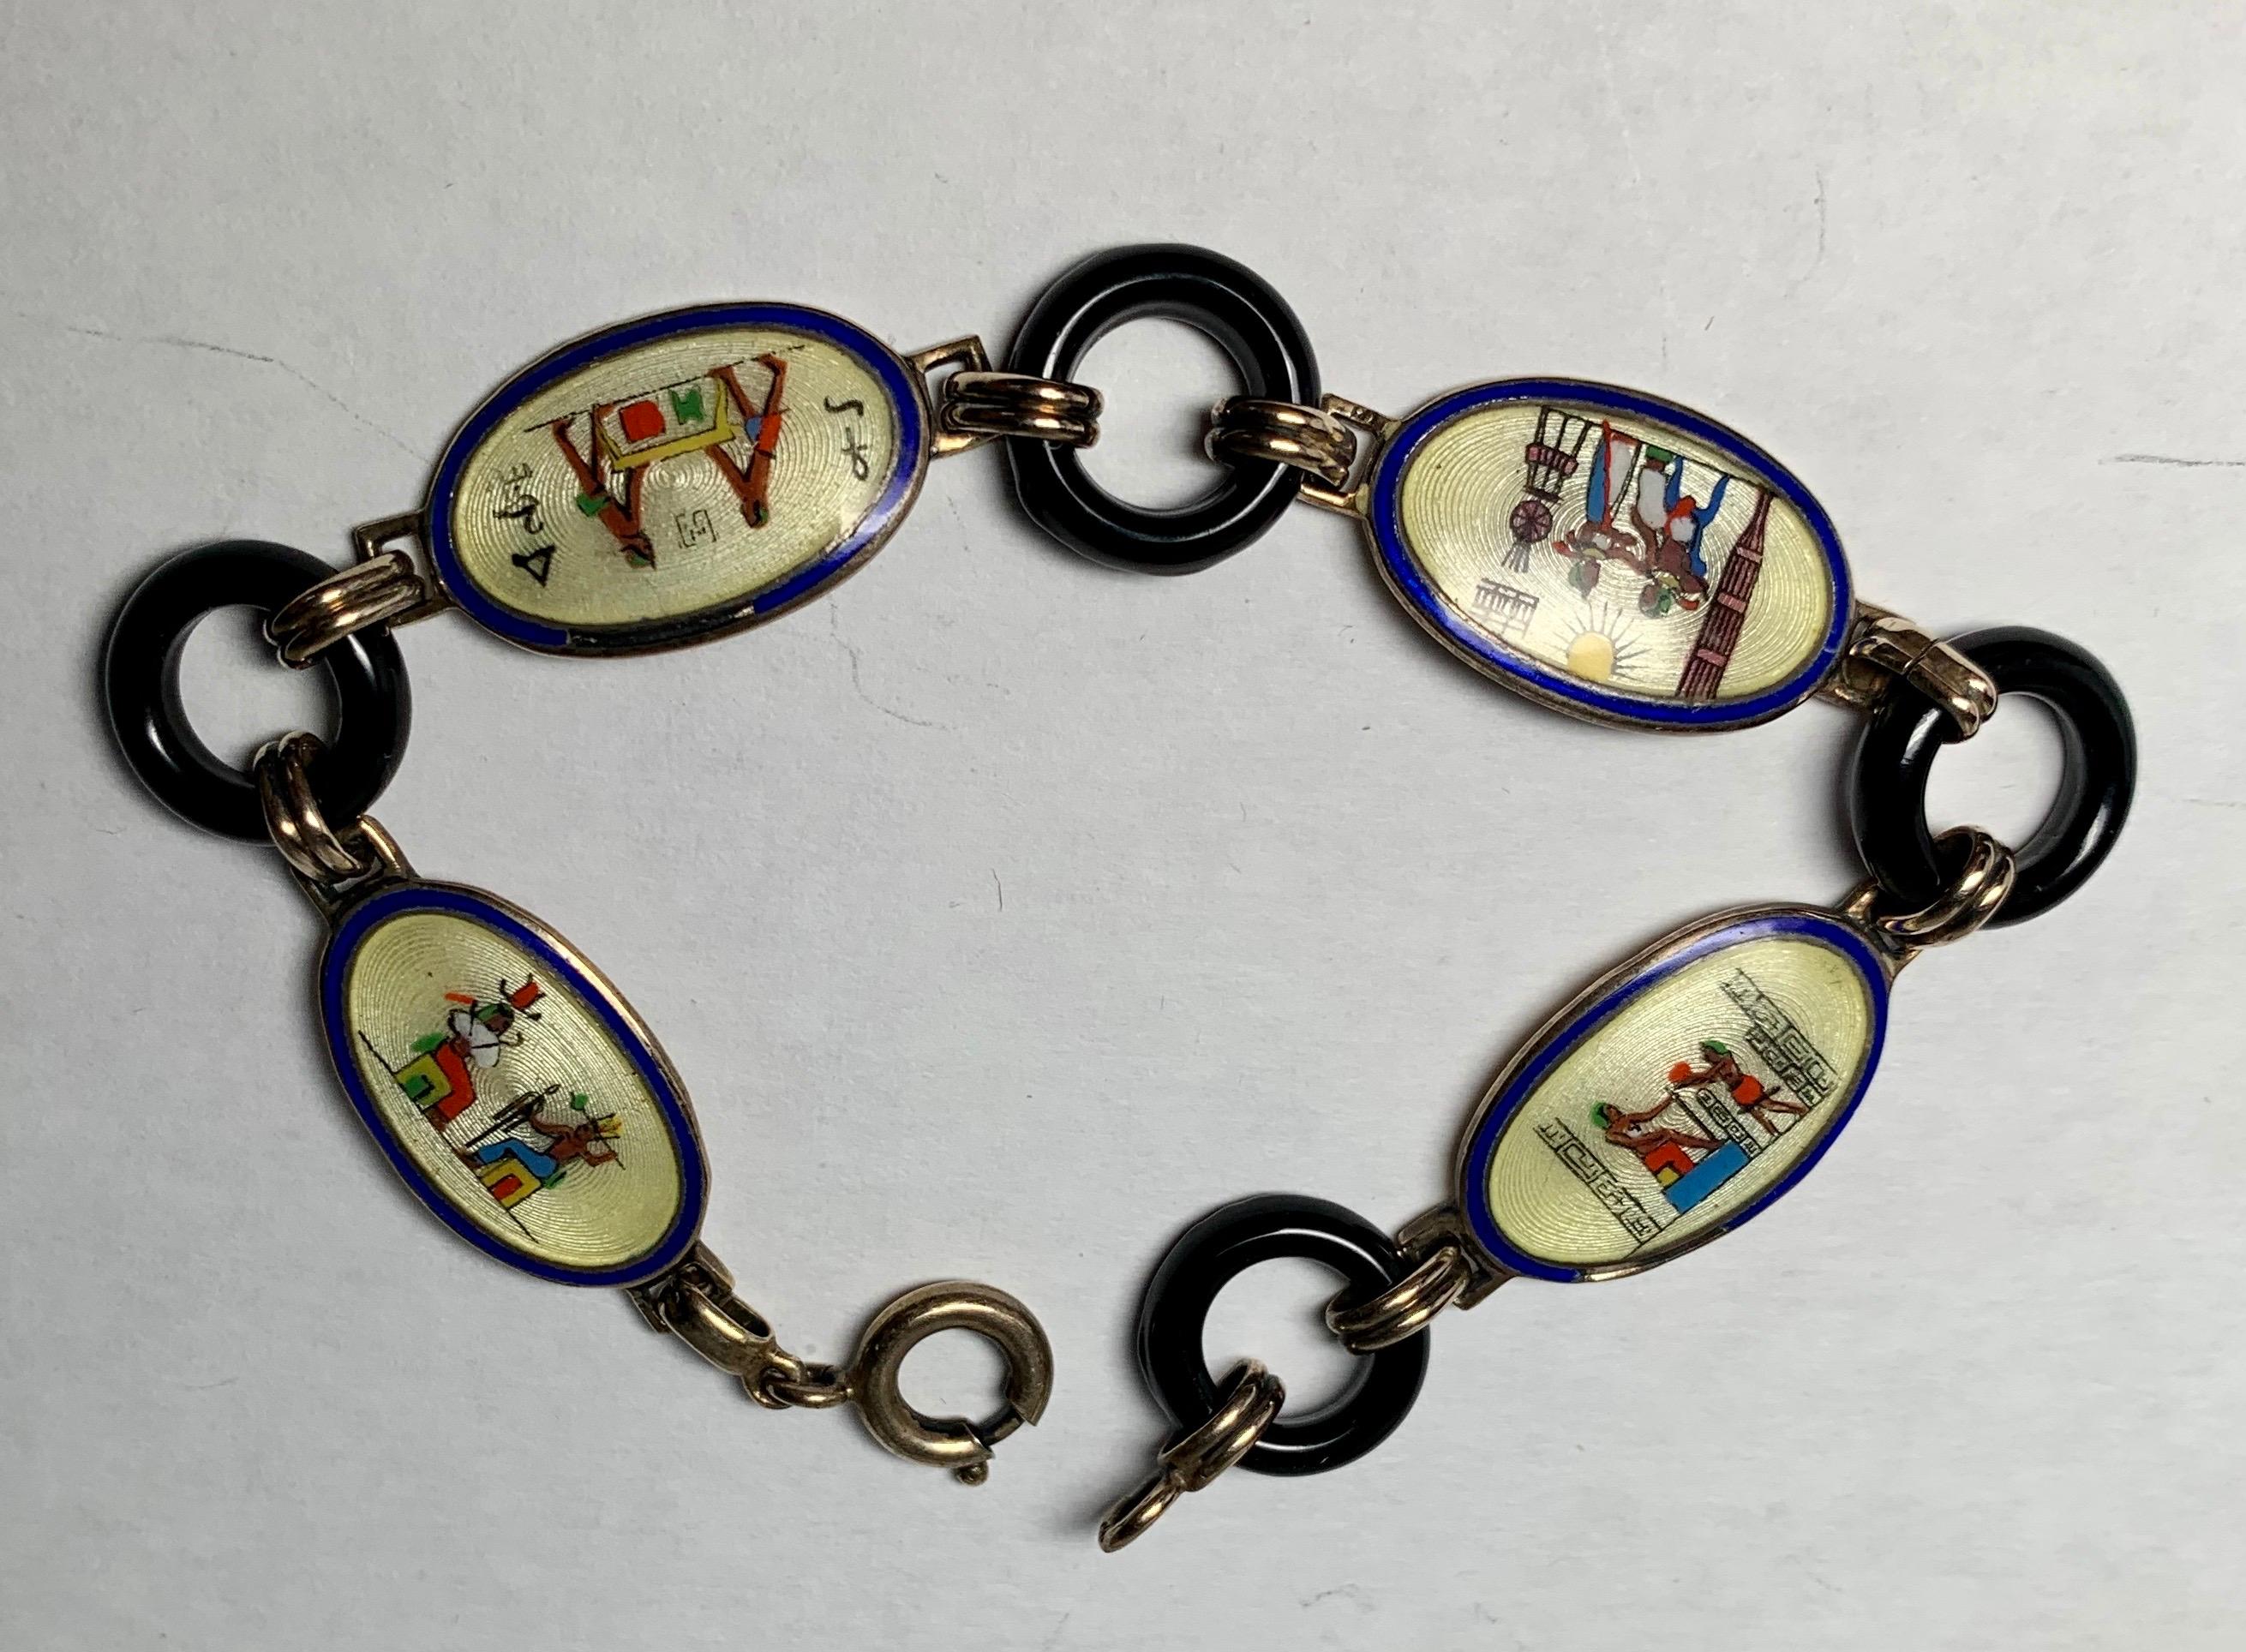 THIS IS A STUNNING EGYPTIAN REVIVAL BRACELET DATING TO THE ART DECO PERIOD WITH MAGNIFICENT IMAGES IN GUILLOCHE ENAMEL OVER STERLING SILVER - A RARE MUSEUM QUALITY BRACELET AND DATING TO CIRCA 1910-1930!
This bracelet is truly magnificent.  And it